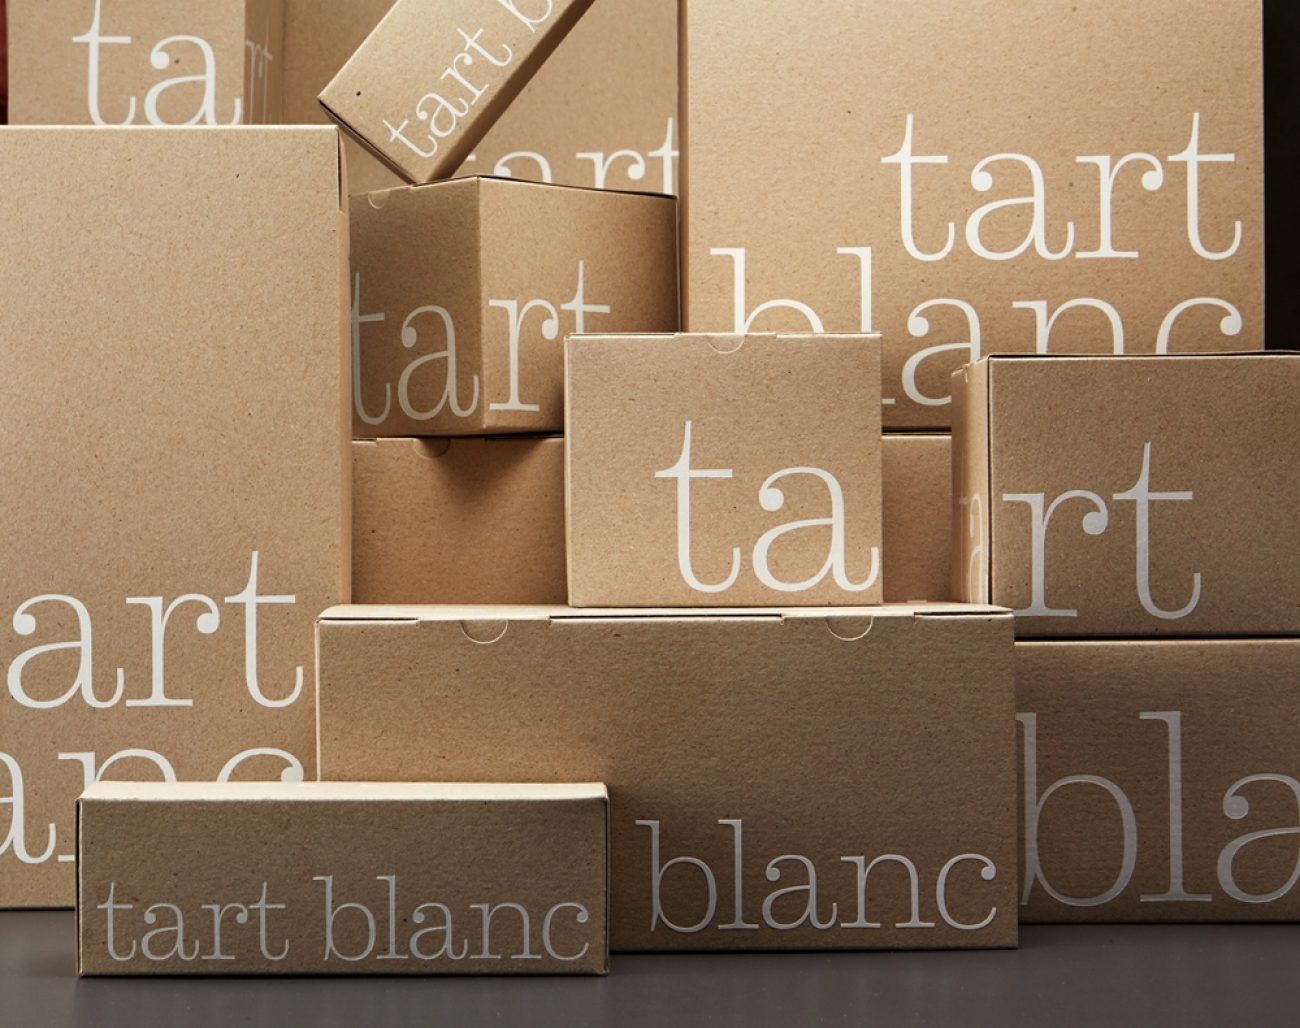  What's in a Box? 6 Design Tips for Beautiful Boxes